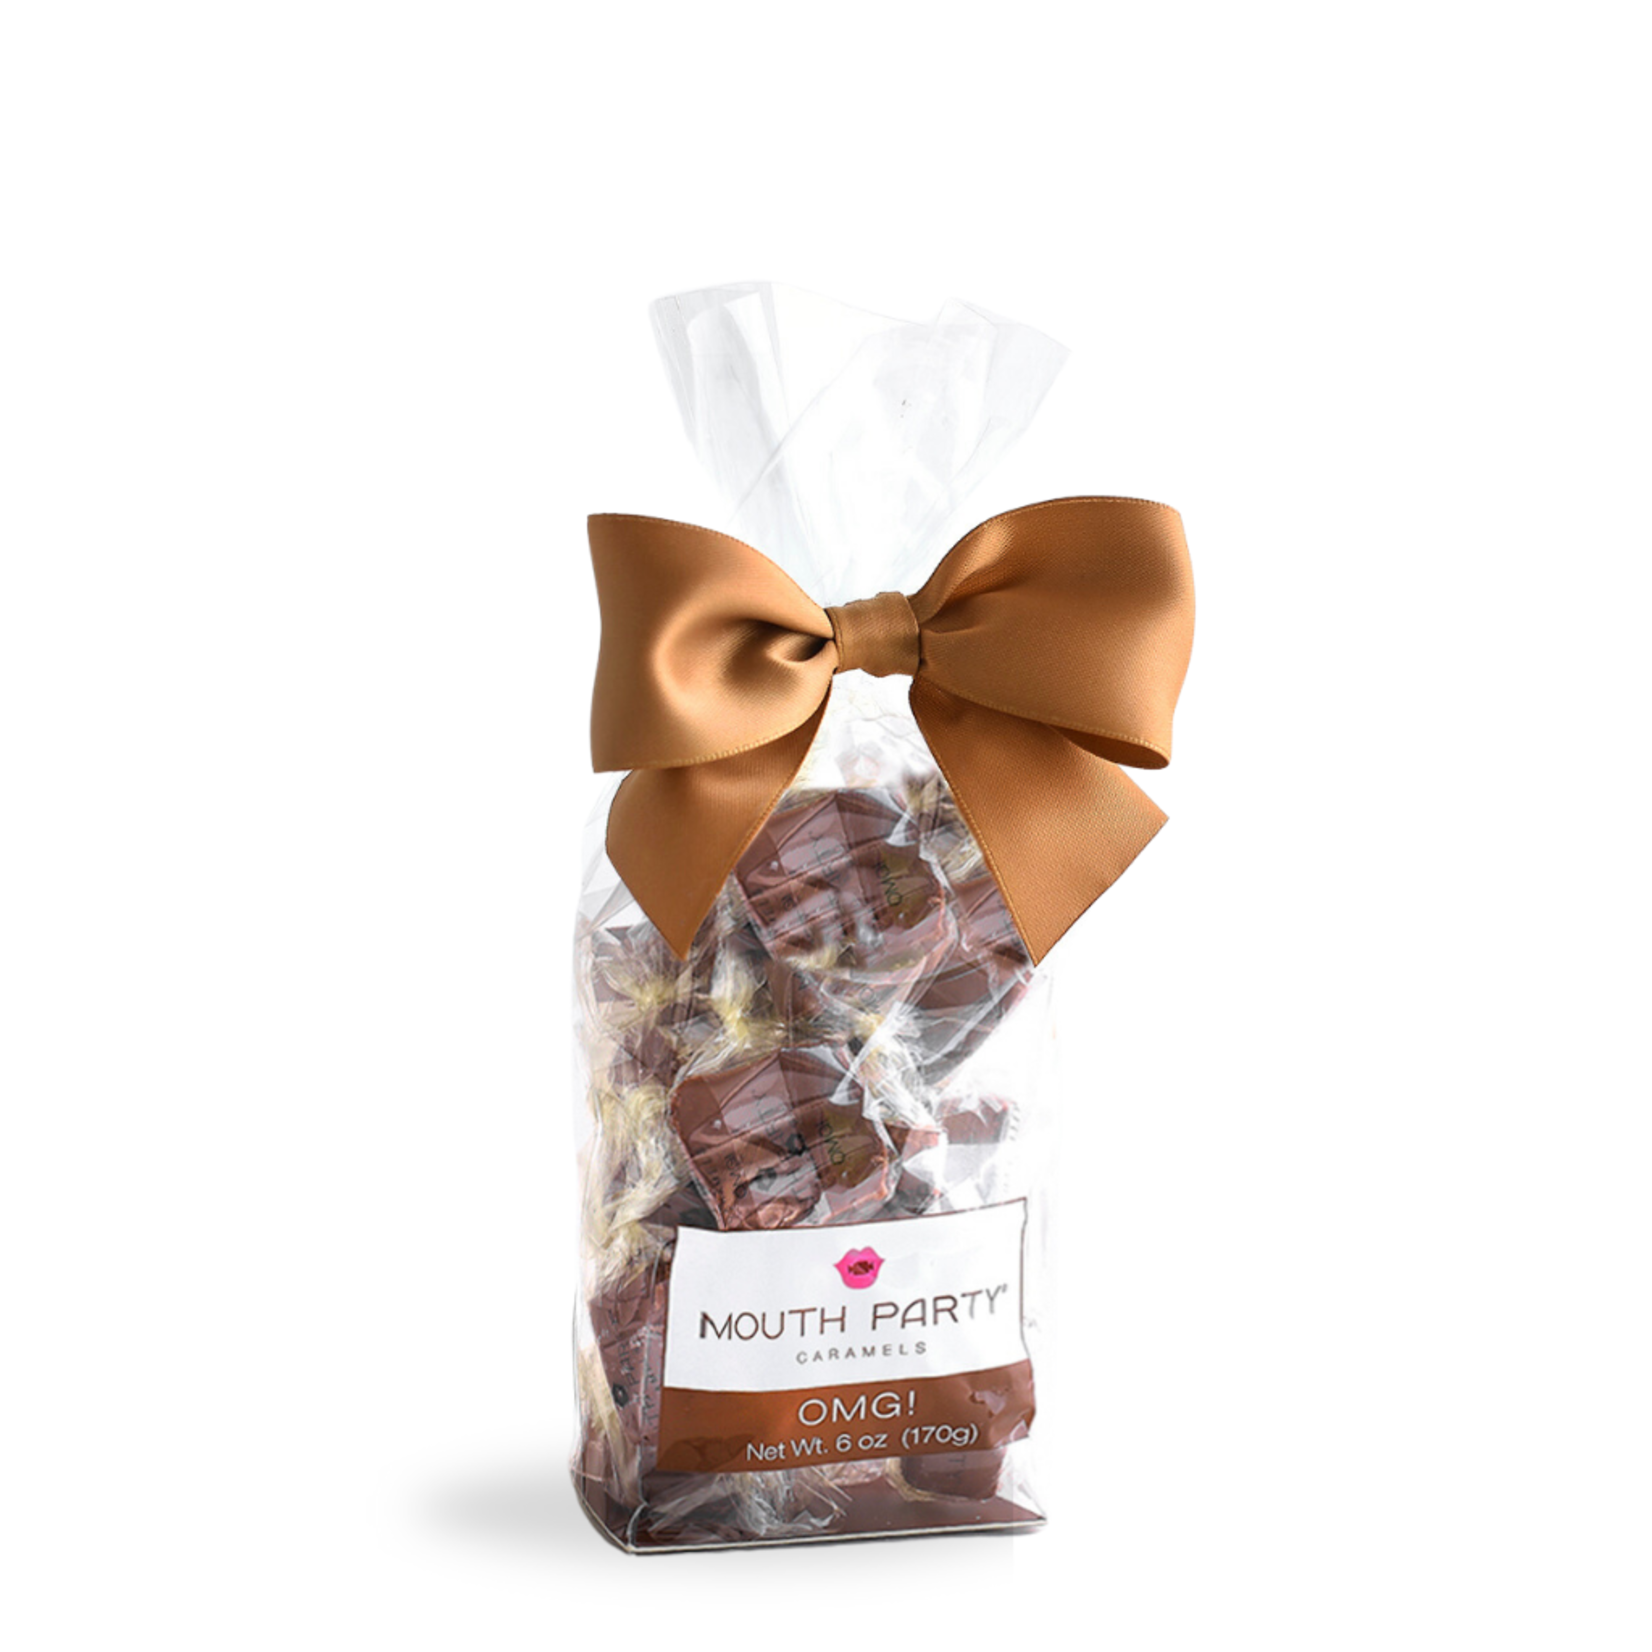 Mouth Party, LLC Mouth Party Tempting OMG! Caramel Gift Bag